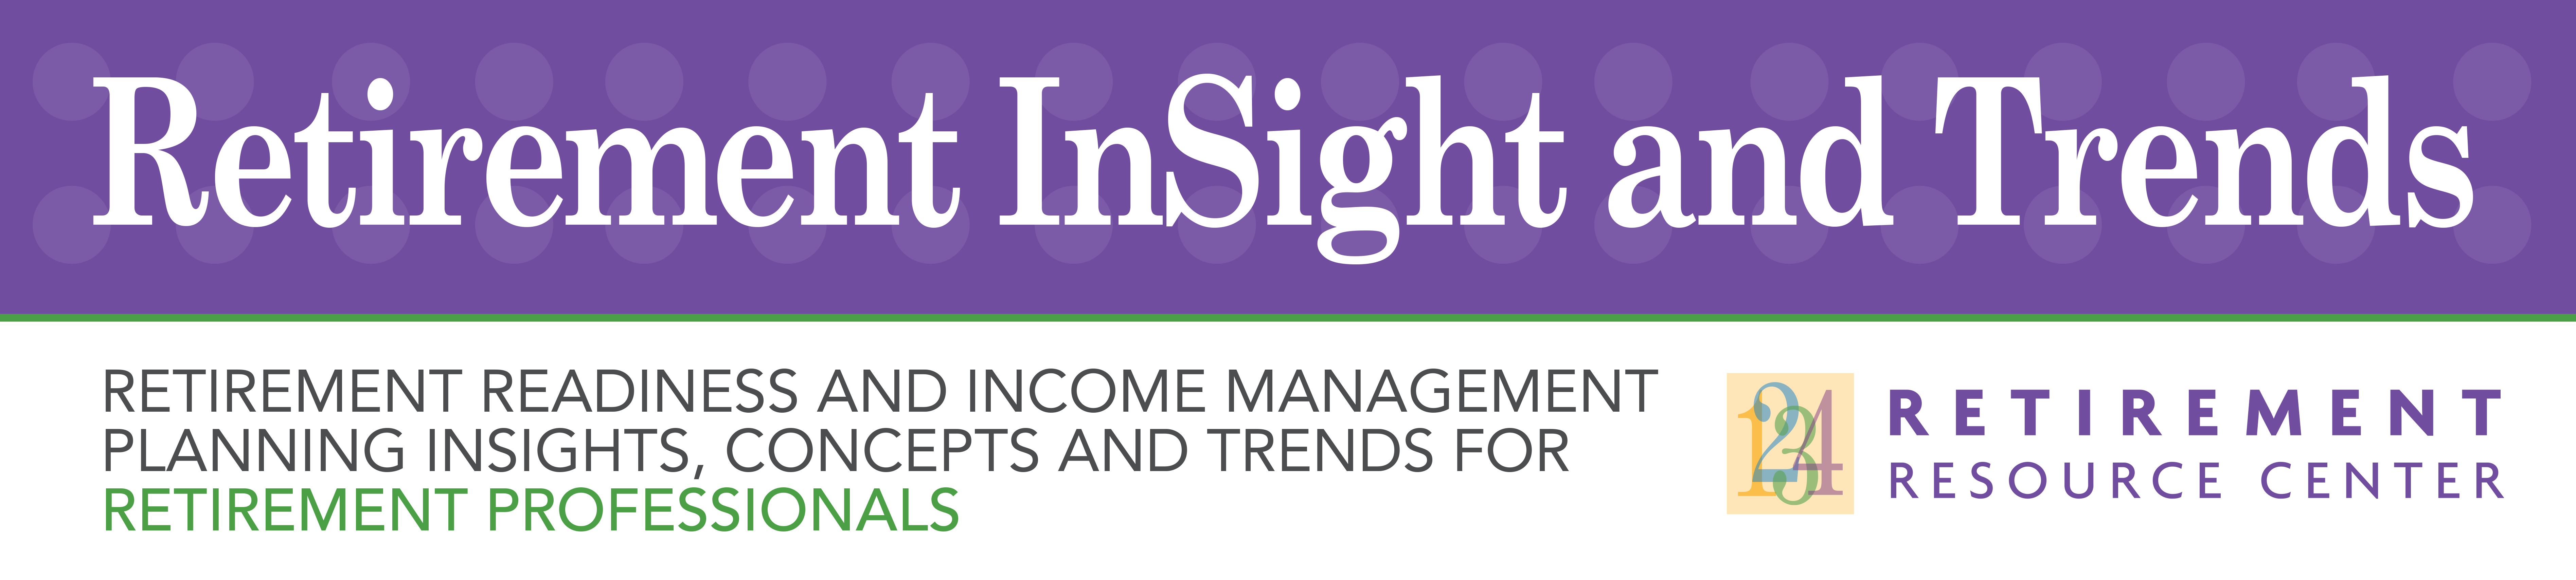 Retirement Insight and Trends: Retirement and Income Planning for Retirement Professionals